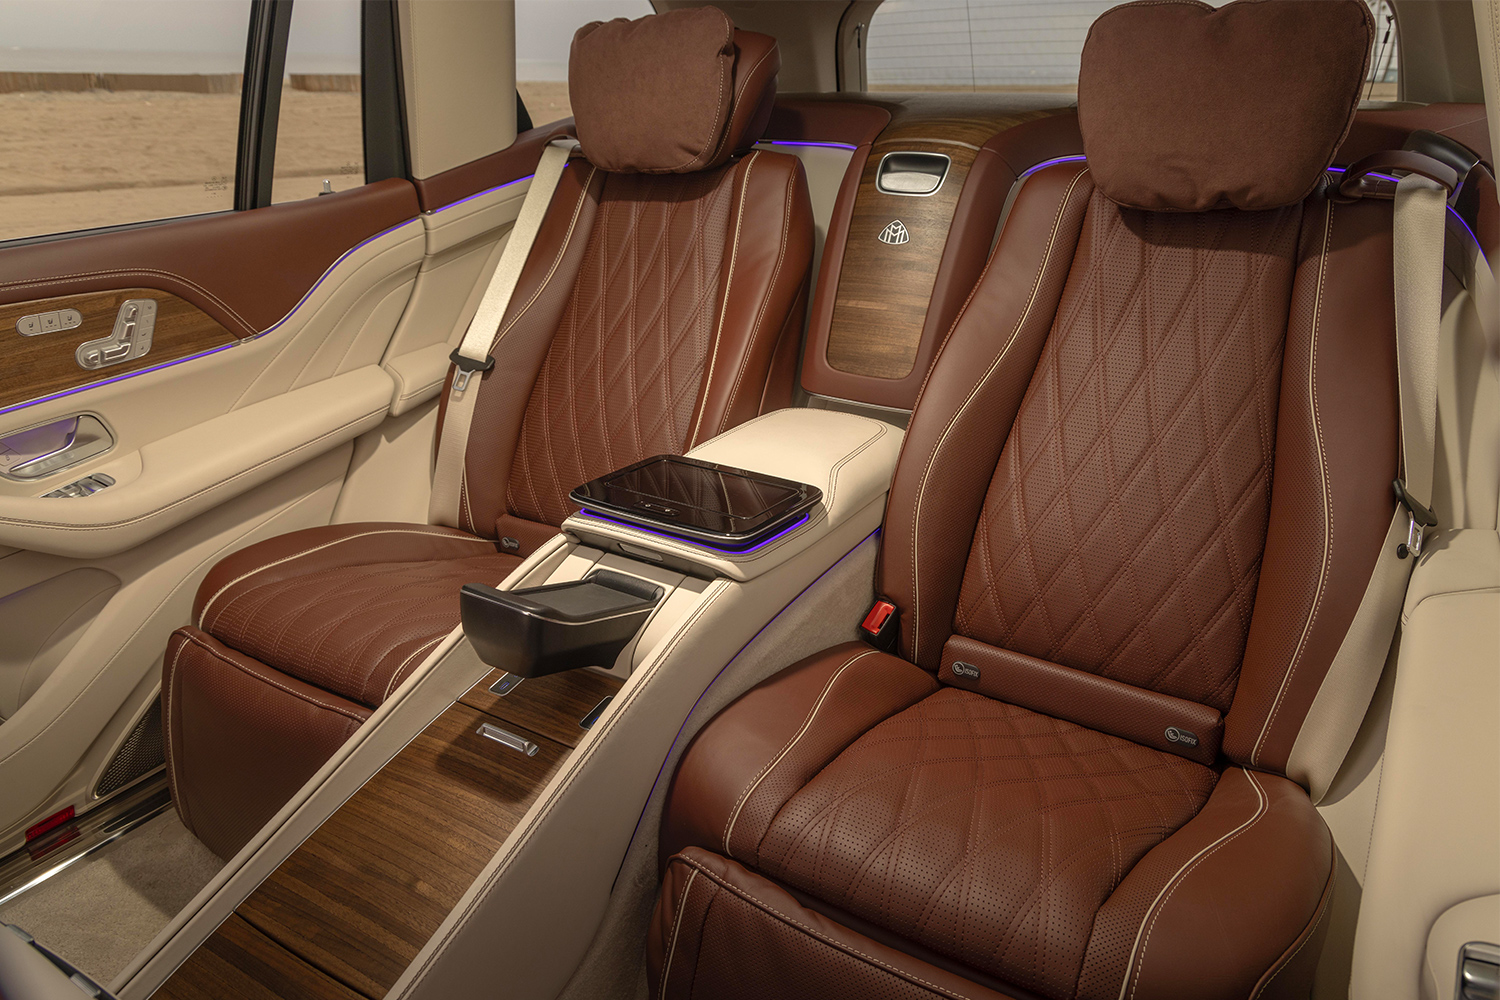 The optional rear executive seats in the Mercedes-Maybach GLS 600 SUV